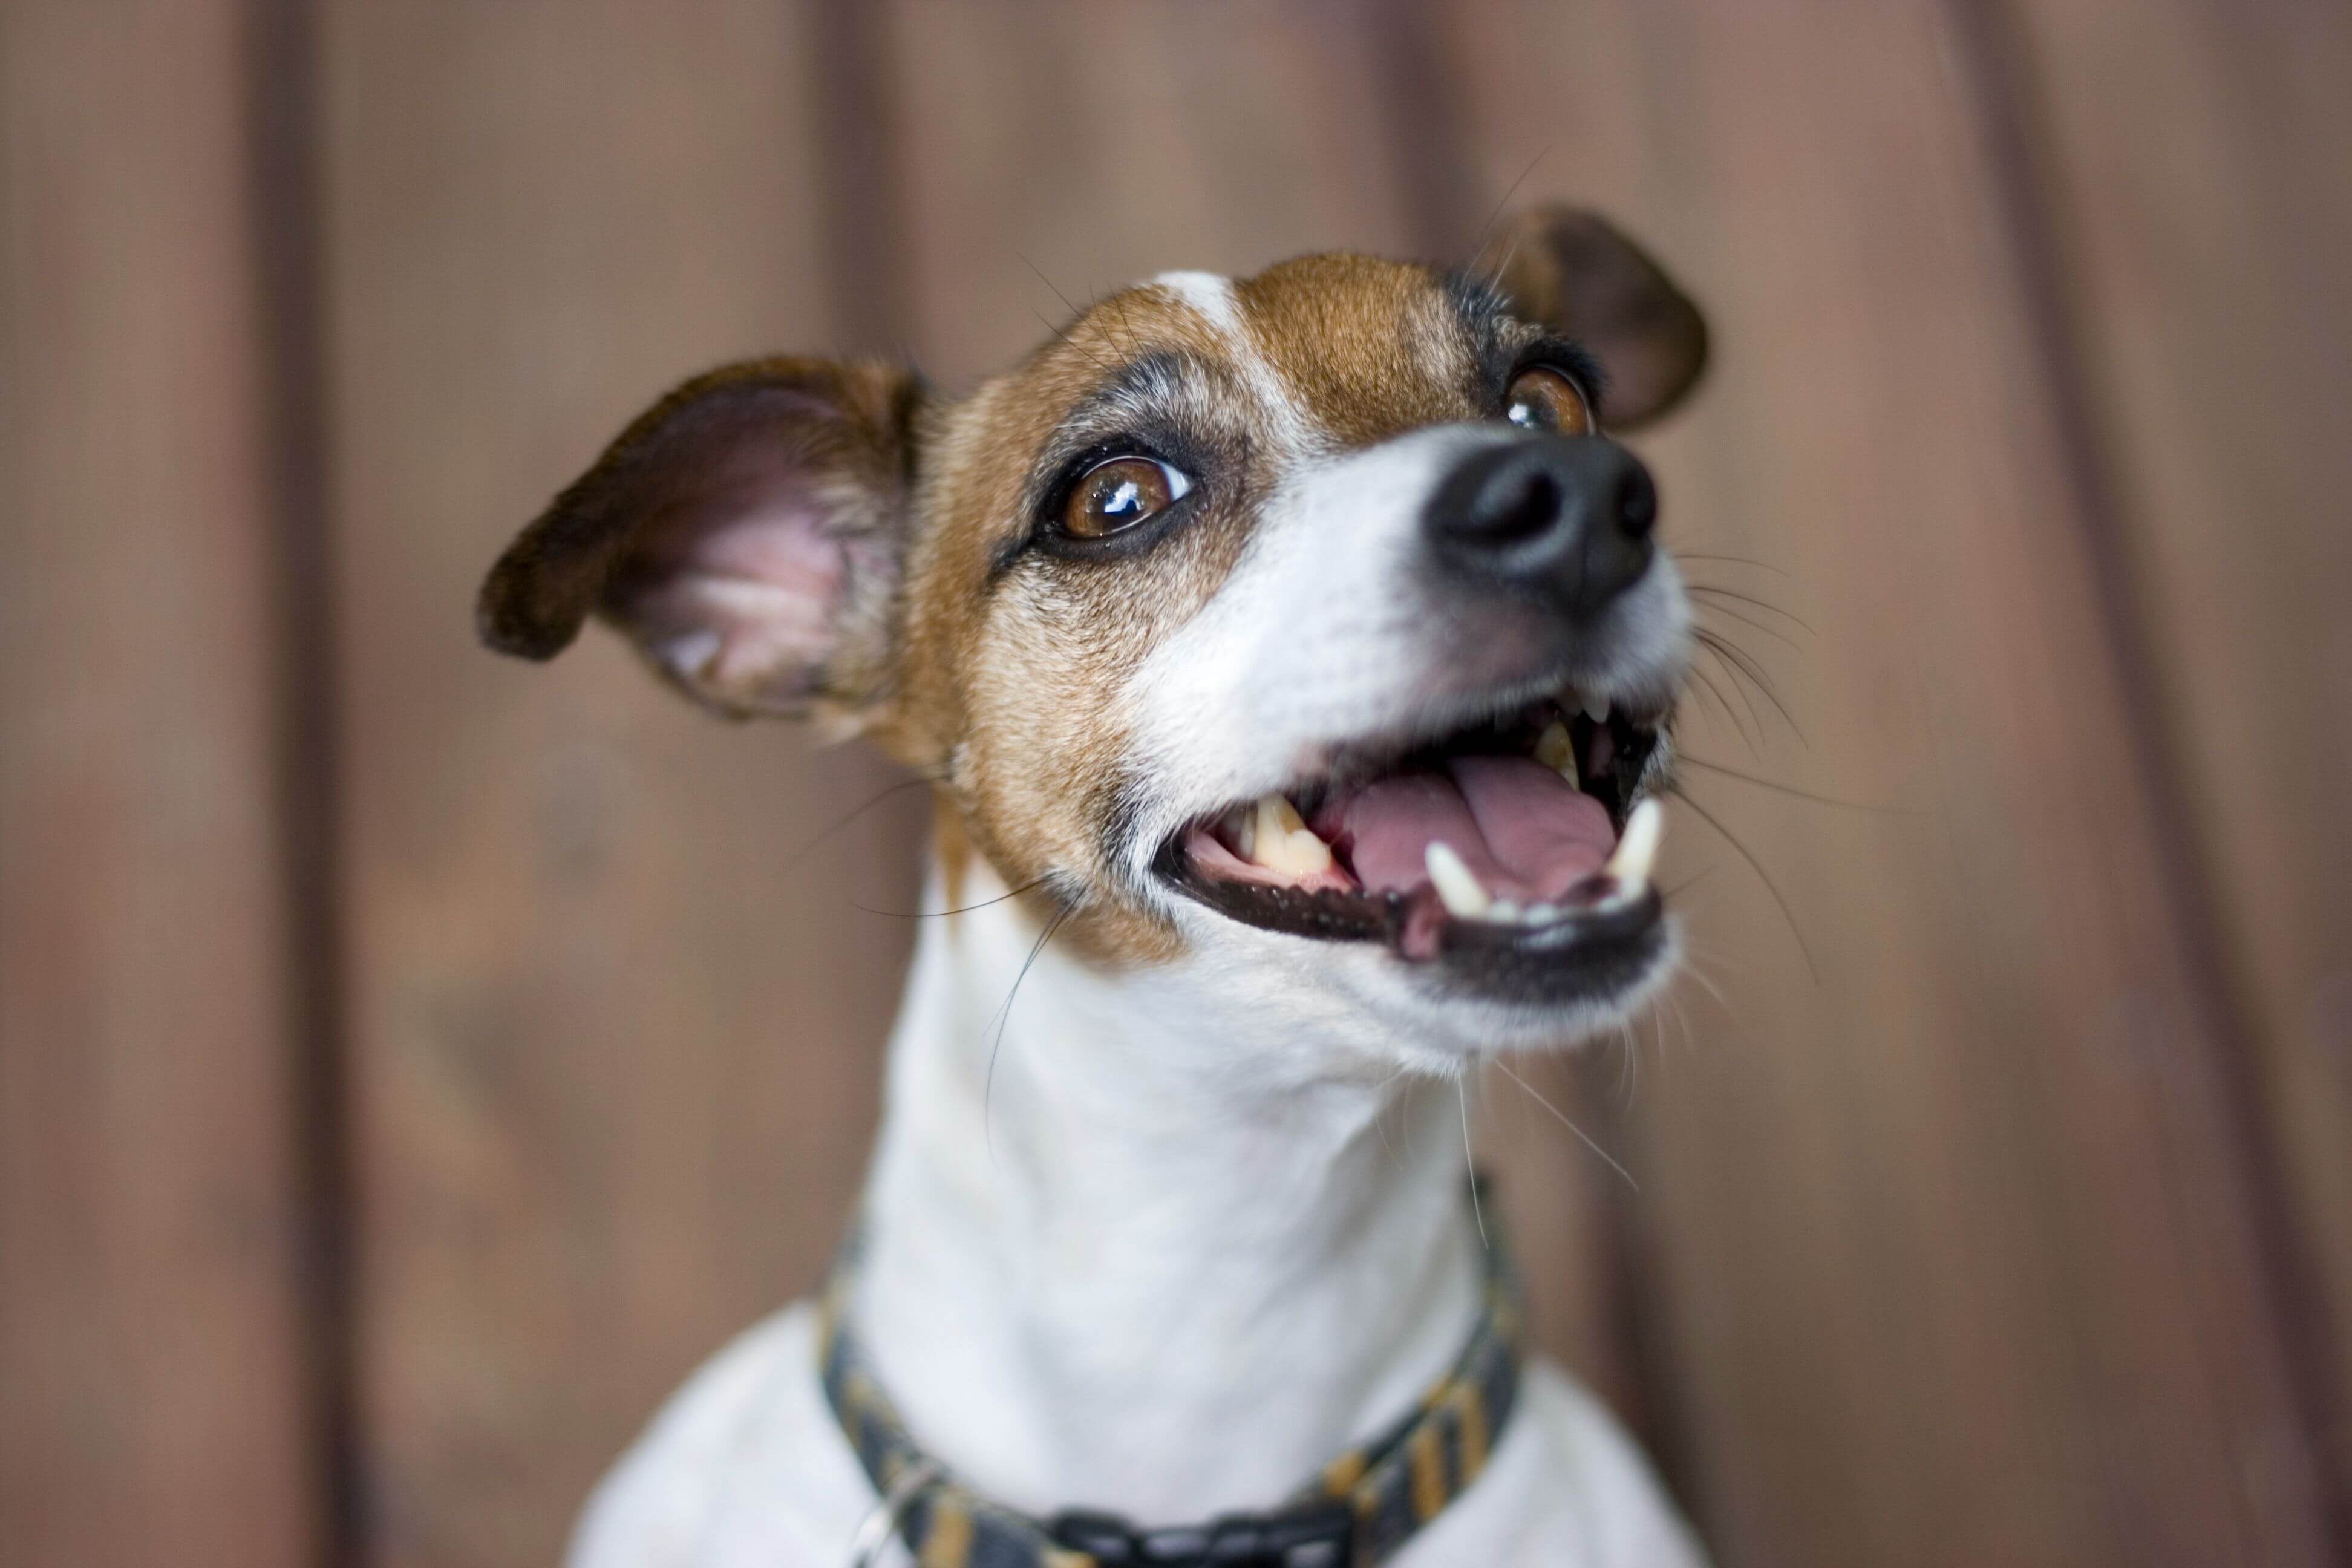 Jack Russell with mouth open, almost smiling